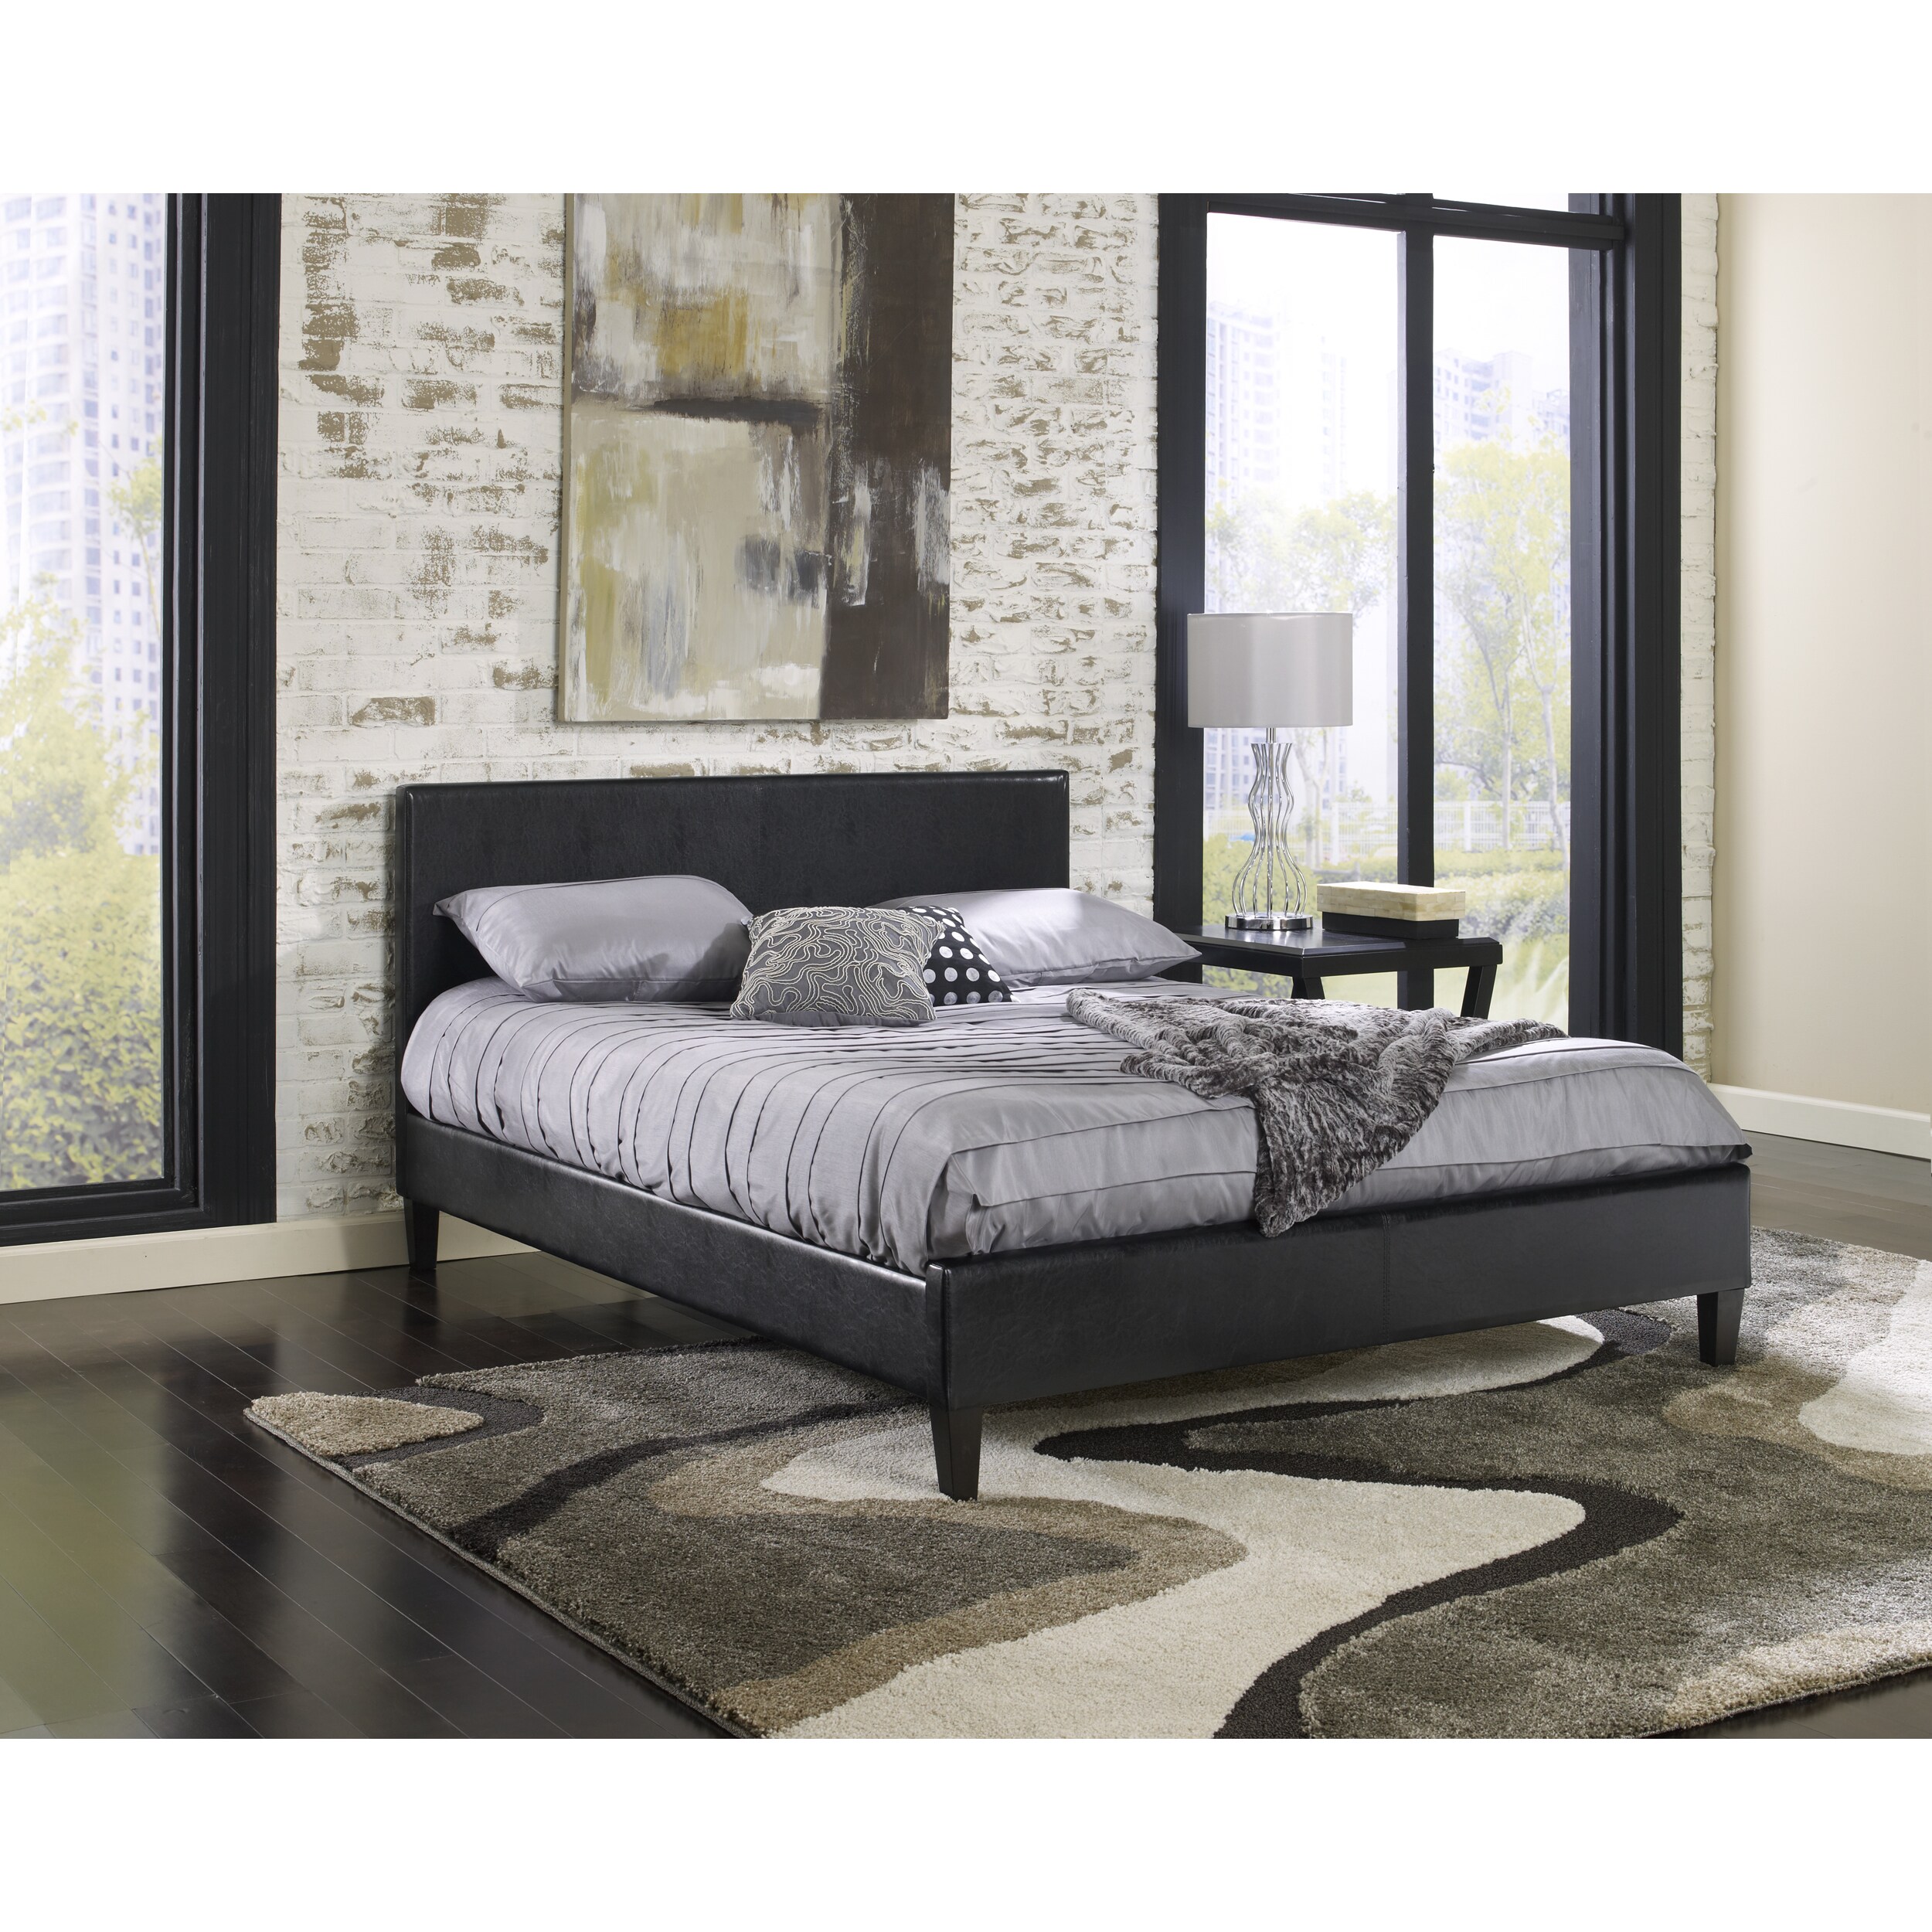 Shop Sleep Sync Beaumont Upholstered Black Leather Complete